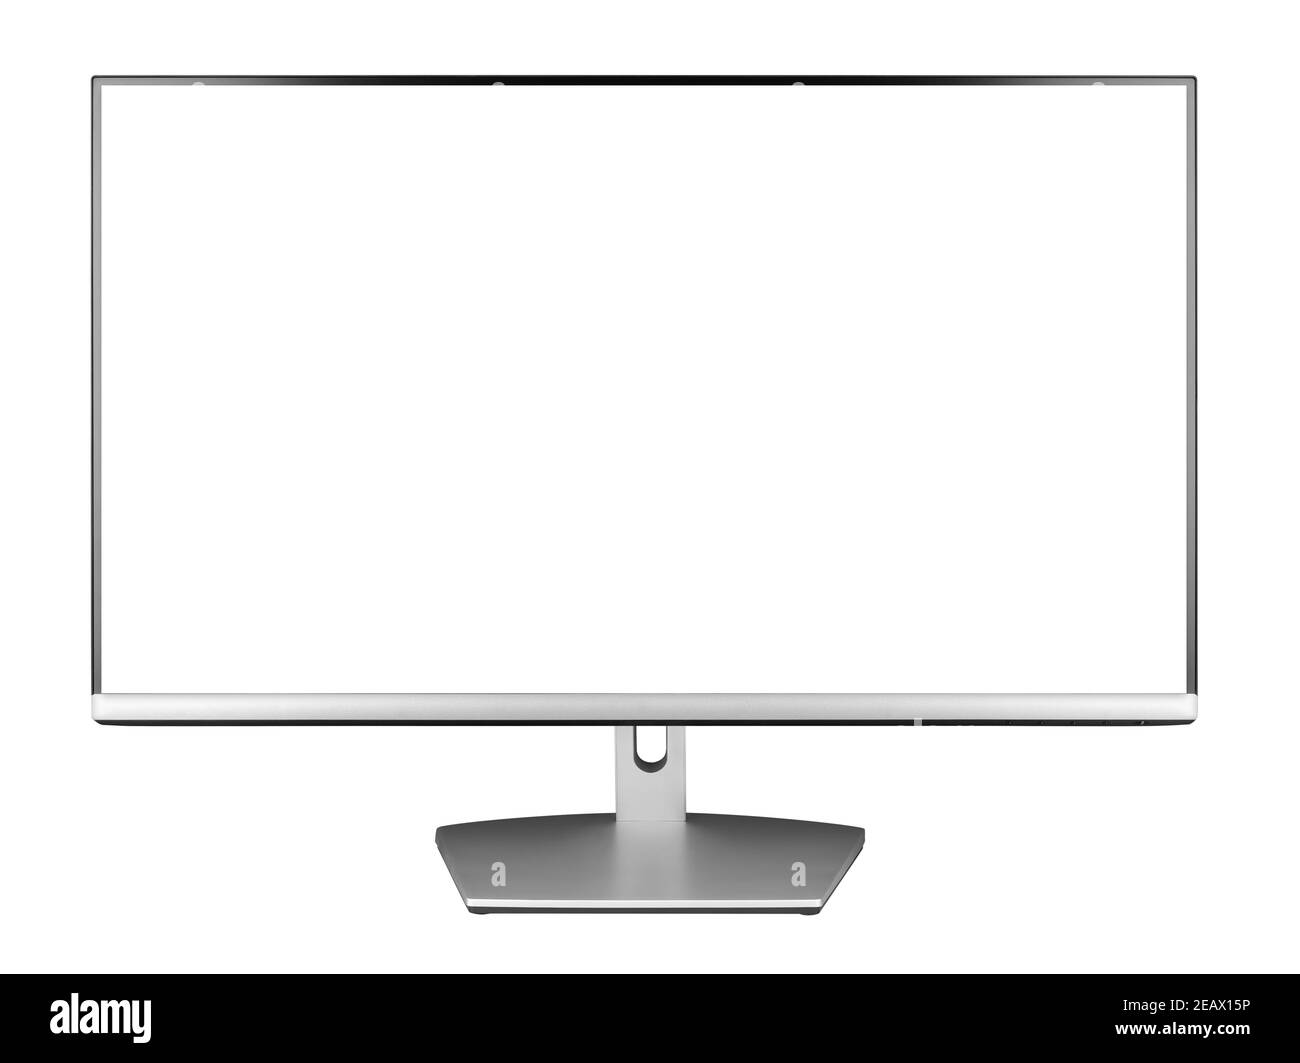 Modern silver black LED computer flat screen display monitor isolated on  white background. pc hardware electronics technology concept Stock Photo -  Alamy